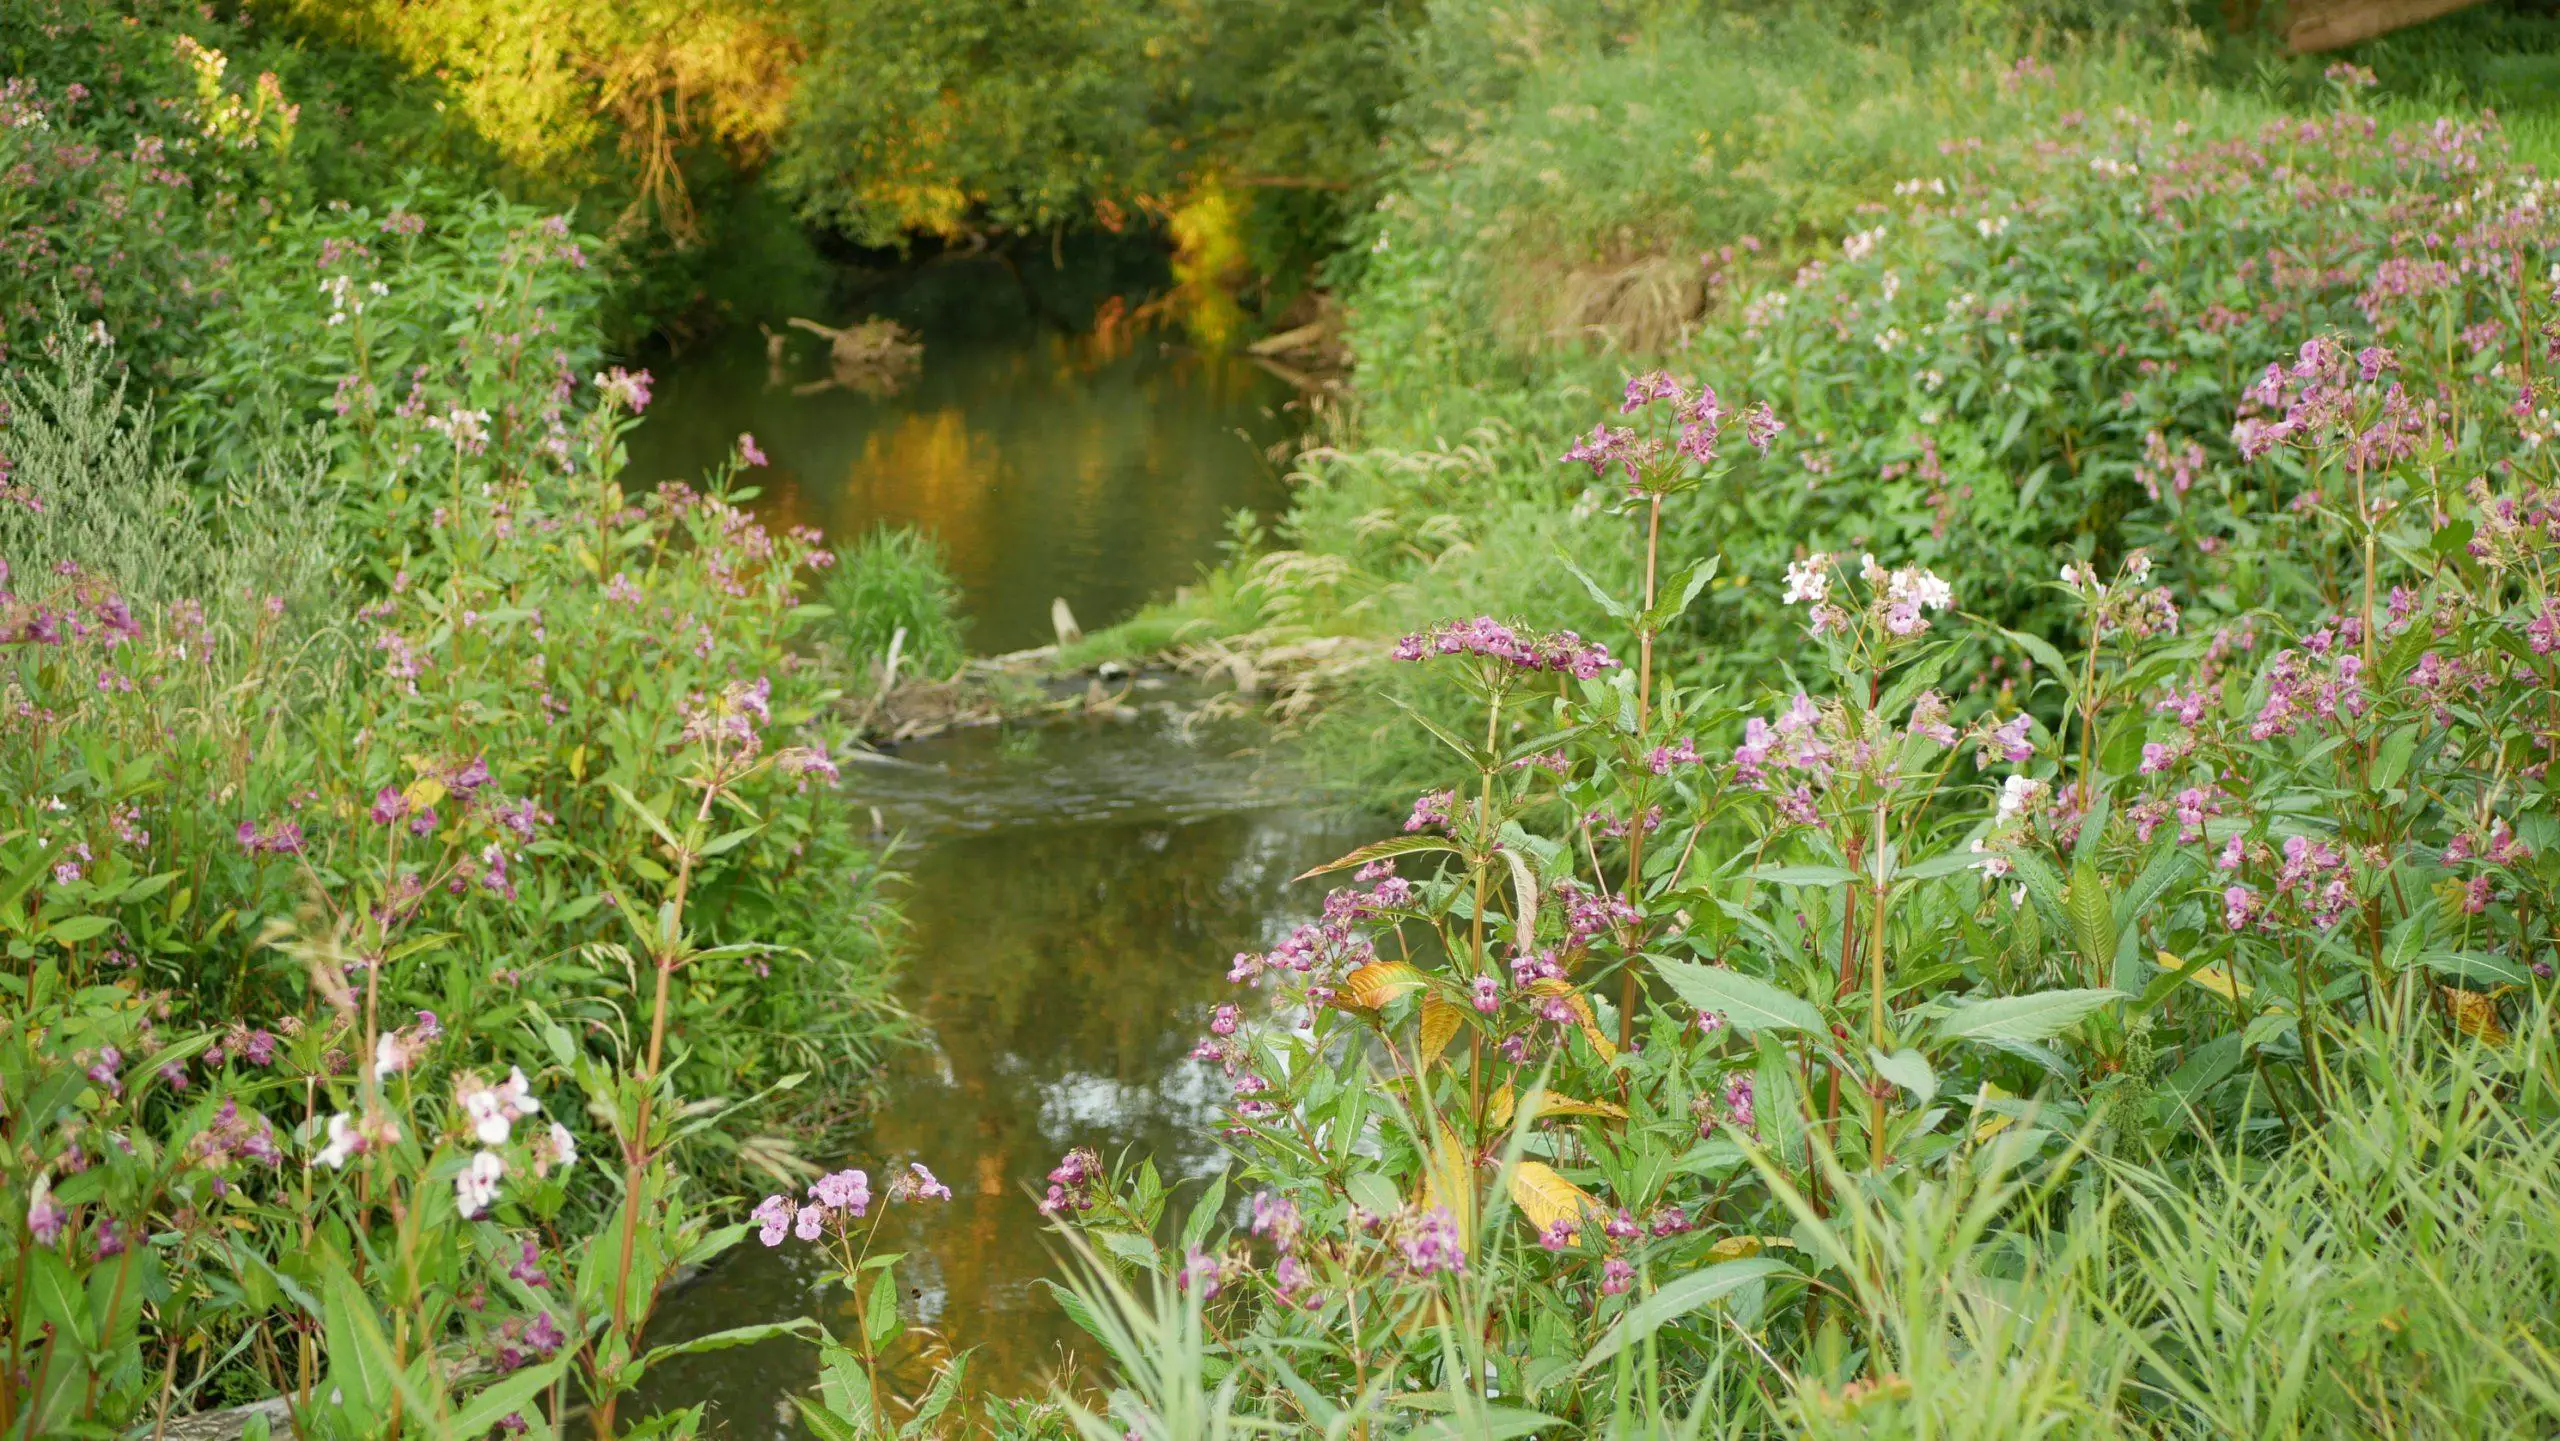 Himalayan Balsam reduces the biodiversity of other plants botany and animals